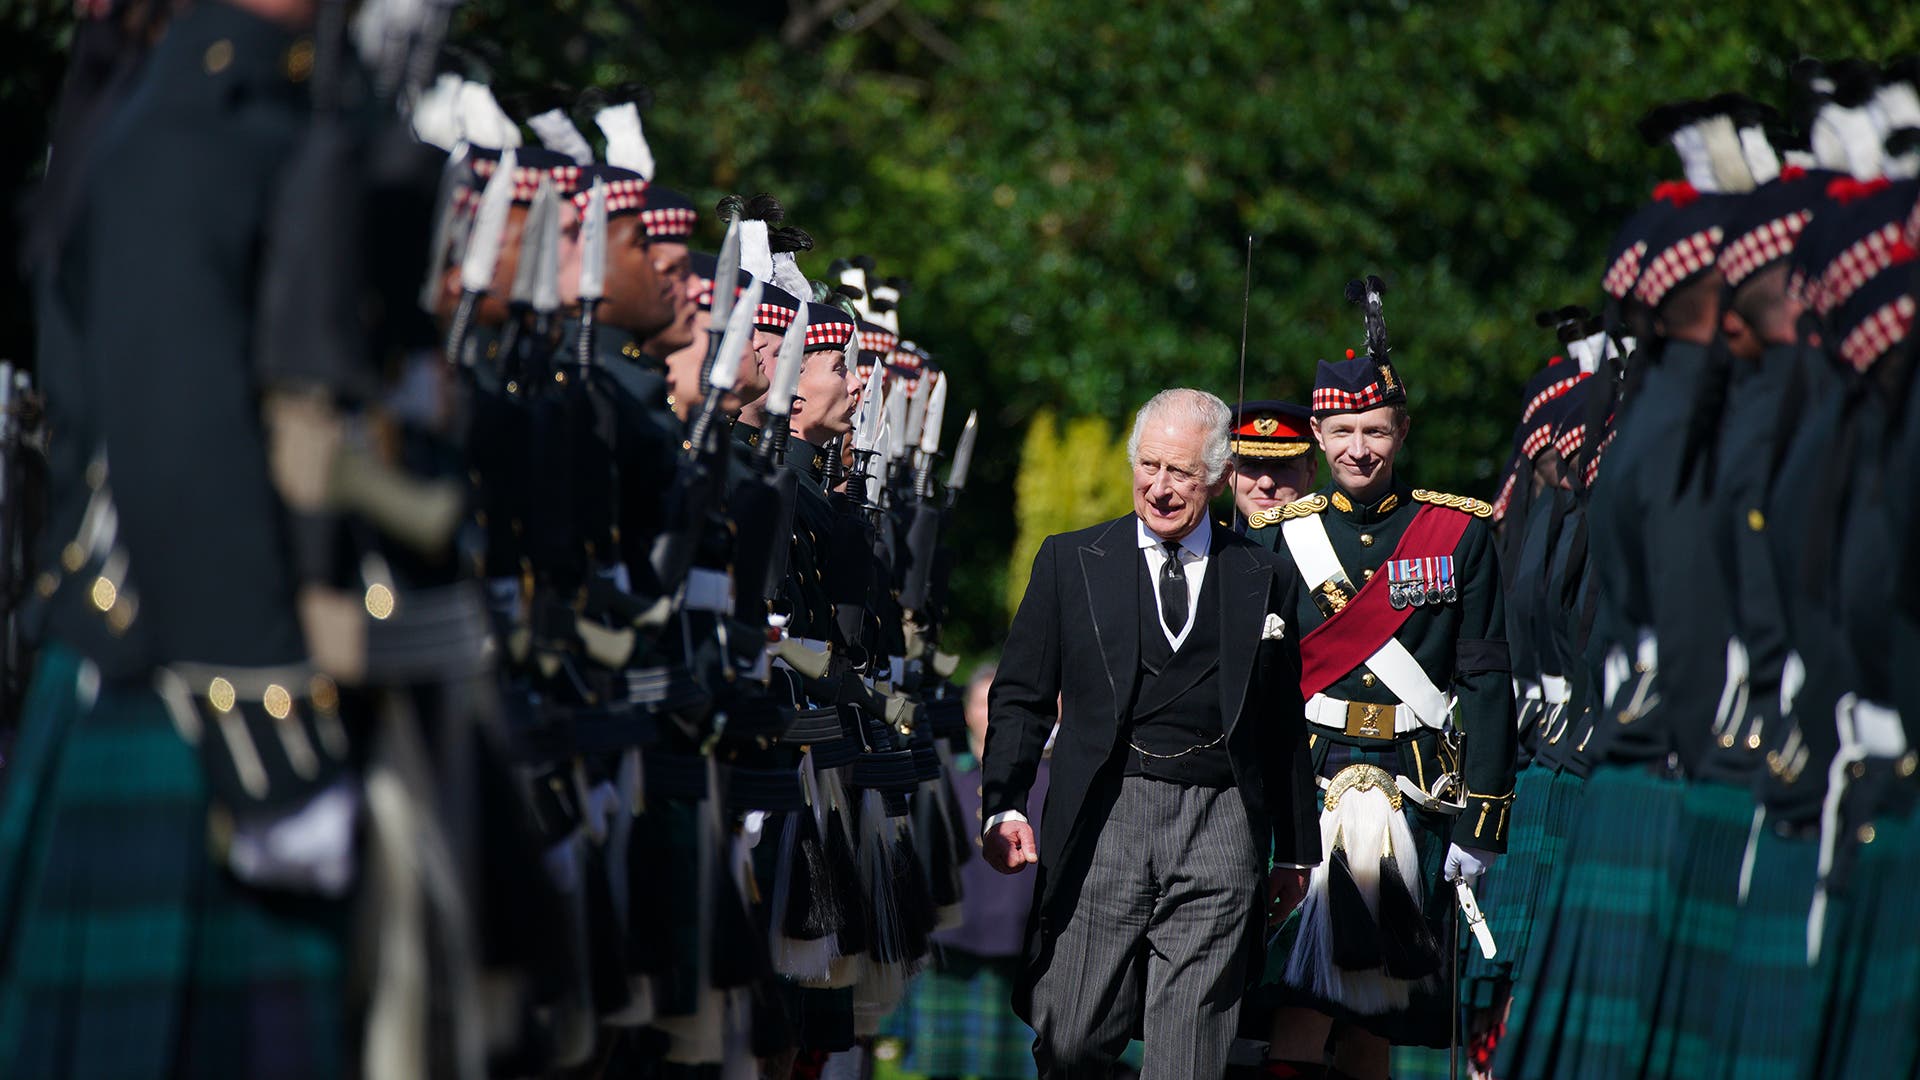 King Charles III inspects the Guard of Honour as he arrives for the Ceremony of the Keys at the Palace of Holyroodhouse, on September 12, 2022, in Edinburgh, Scotland.